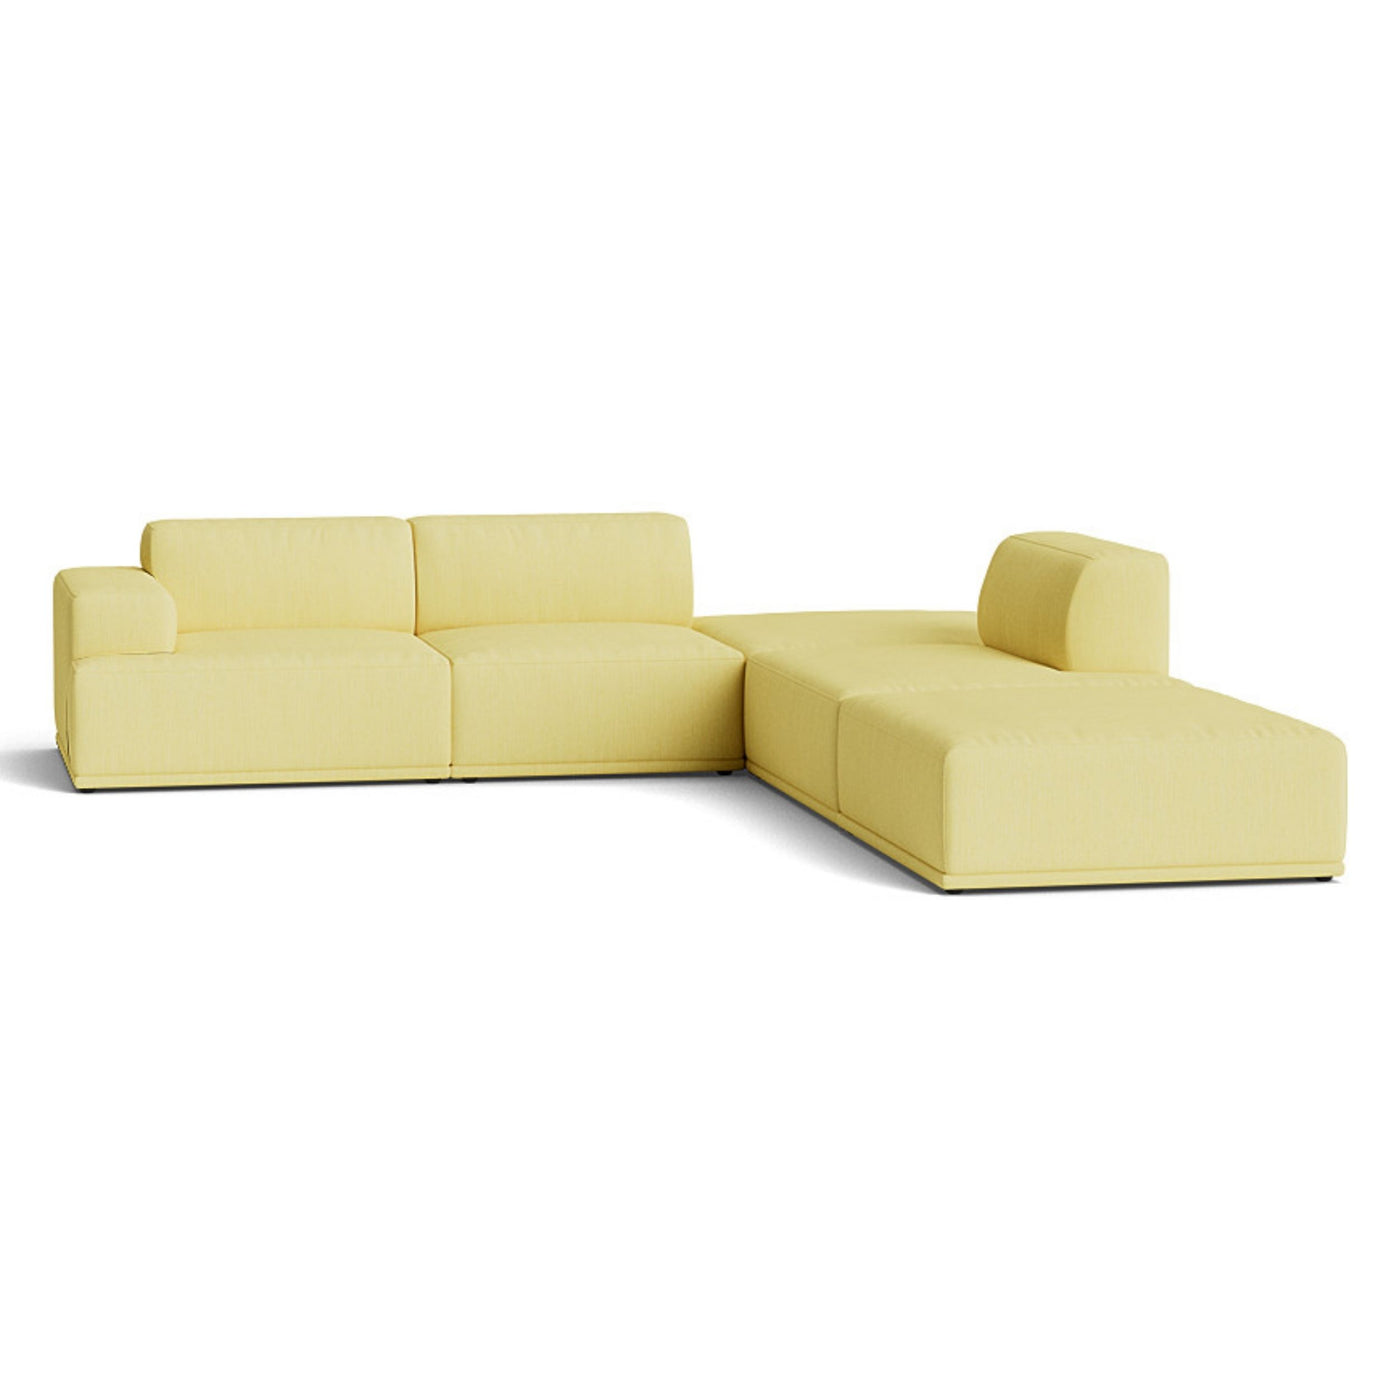 Muuto Connect Soft Modular Corner Sofa, configuration 3. made-to-order from someday designs. #colour_balder-432